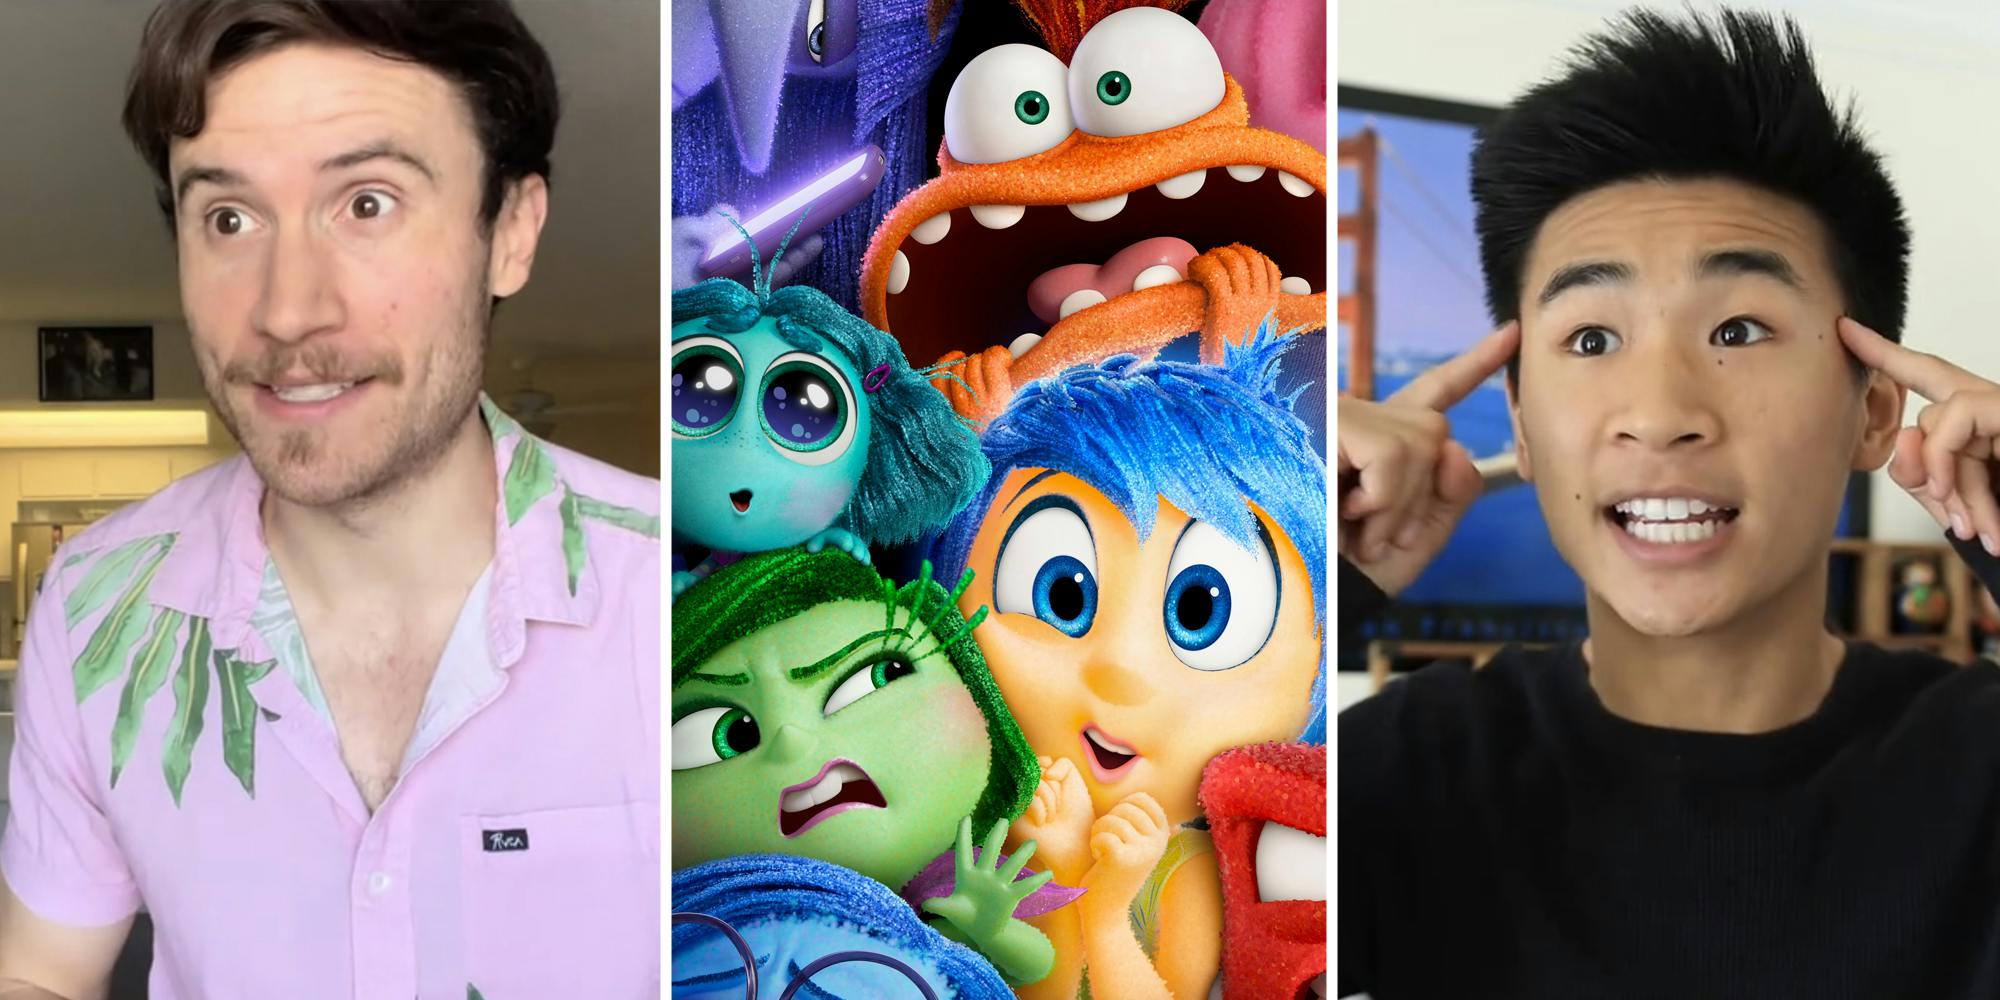 inside out 3 new emotions: Man 1 talking(l), Inside out 2 poster(c), Man 2 talking(r)